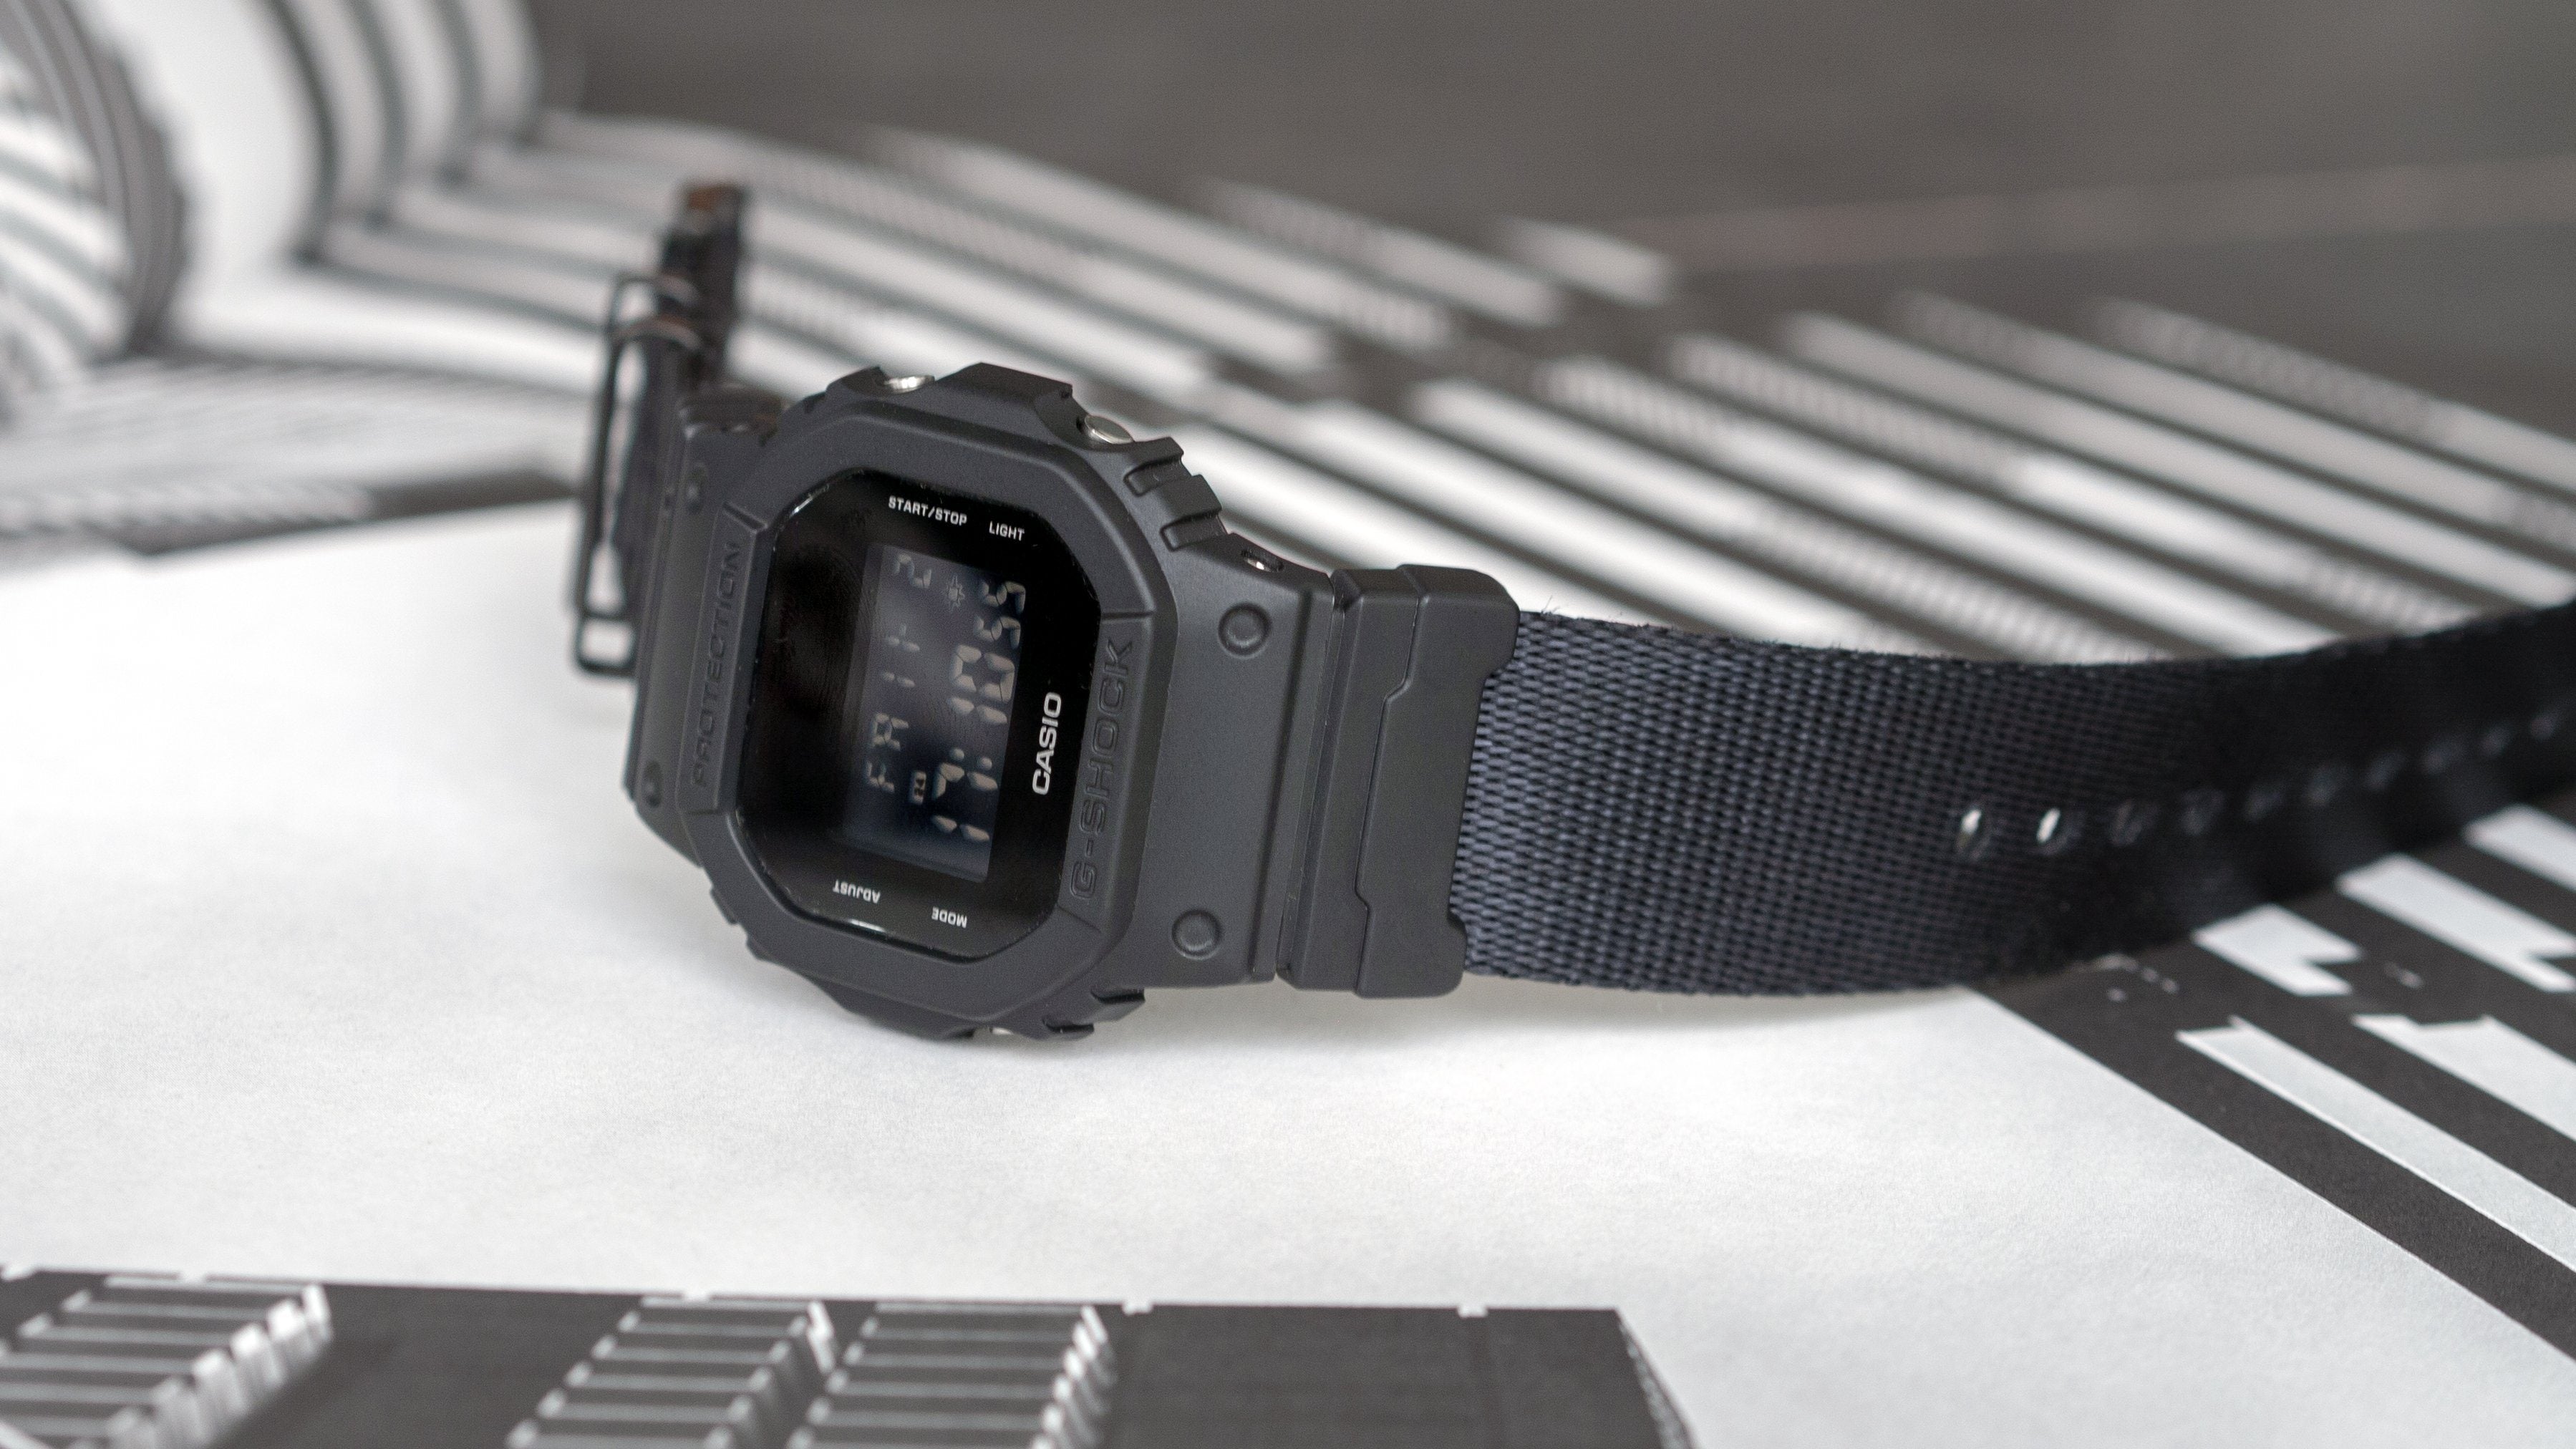 gshock DW5600 with seat belt adapter kit